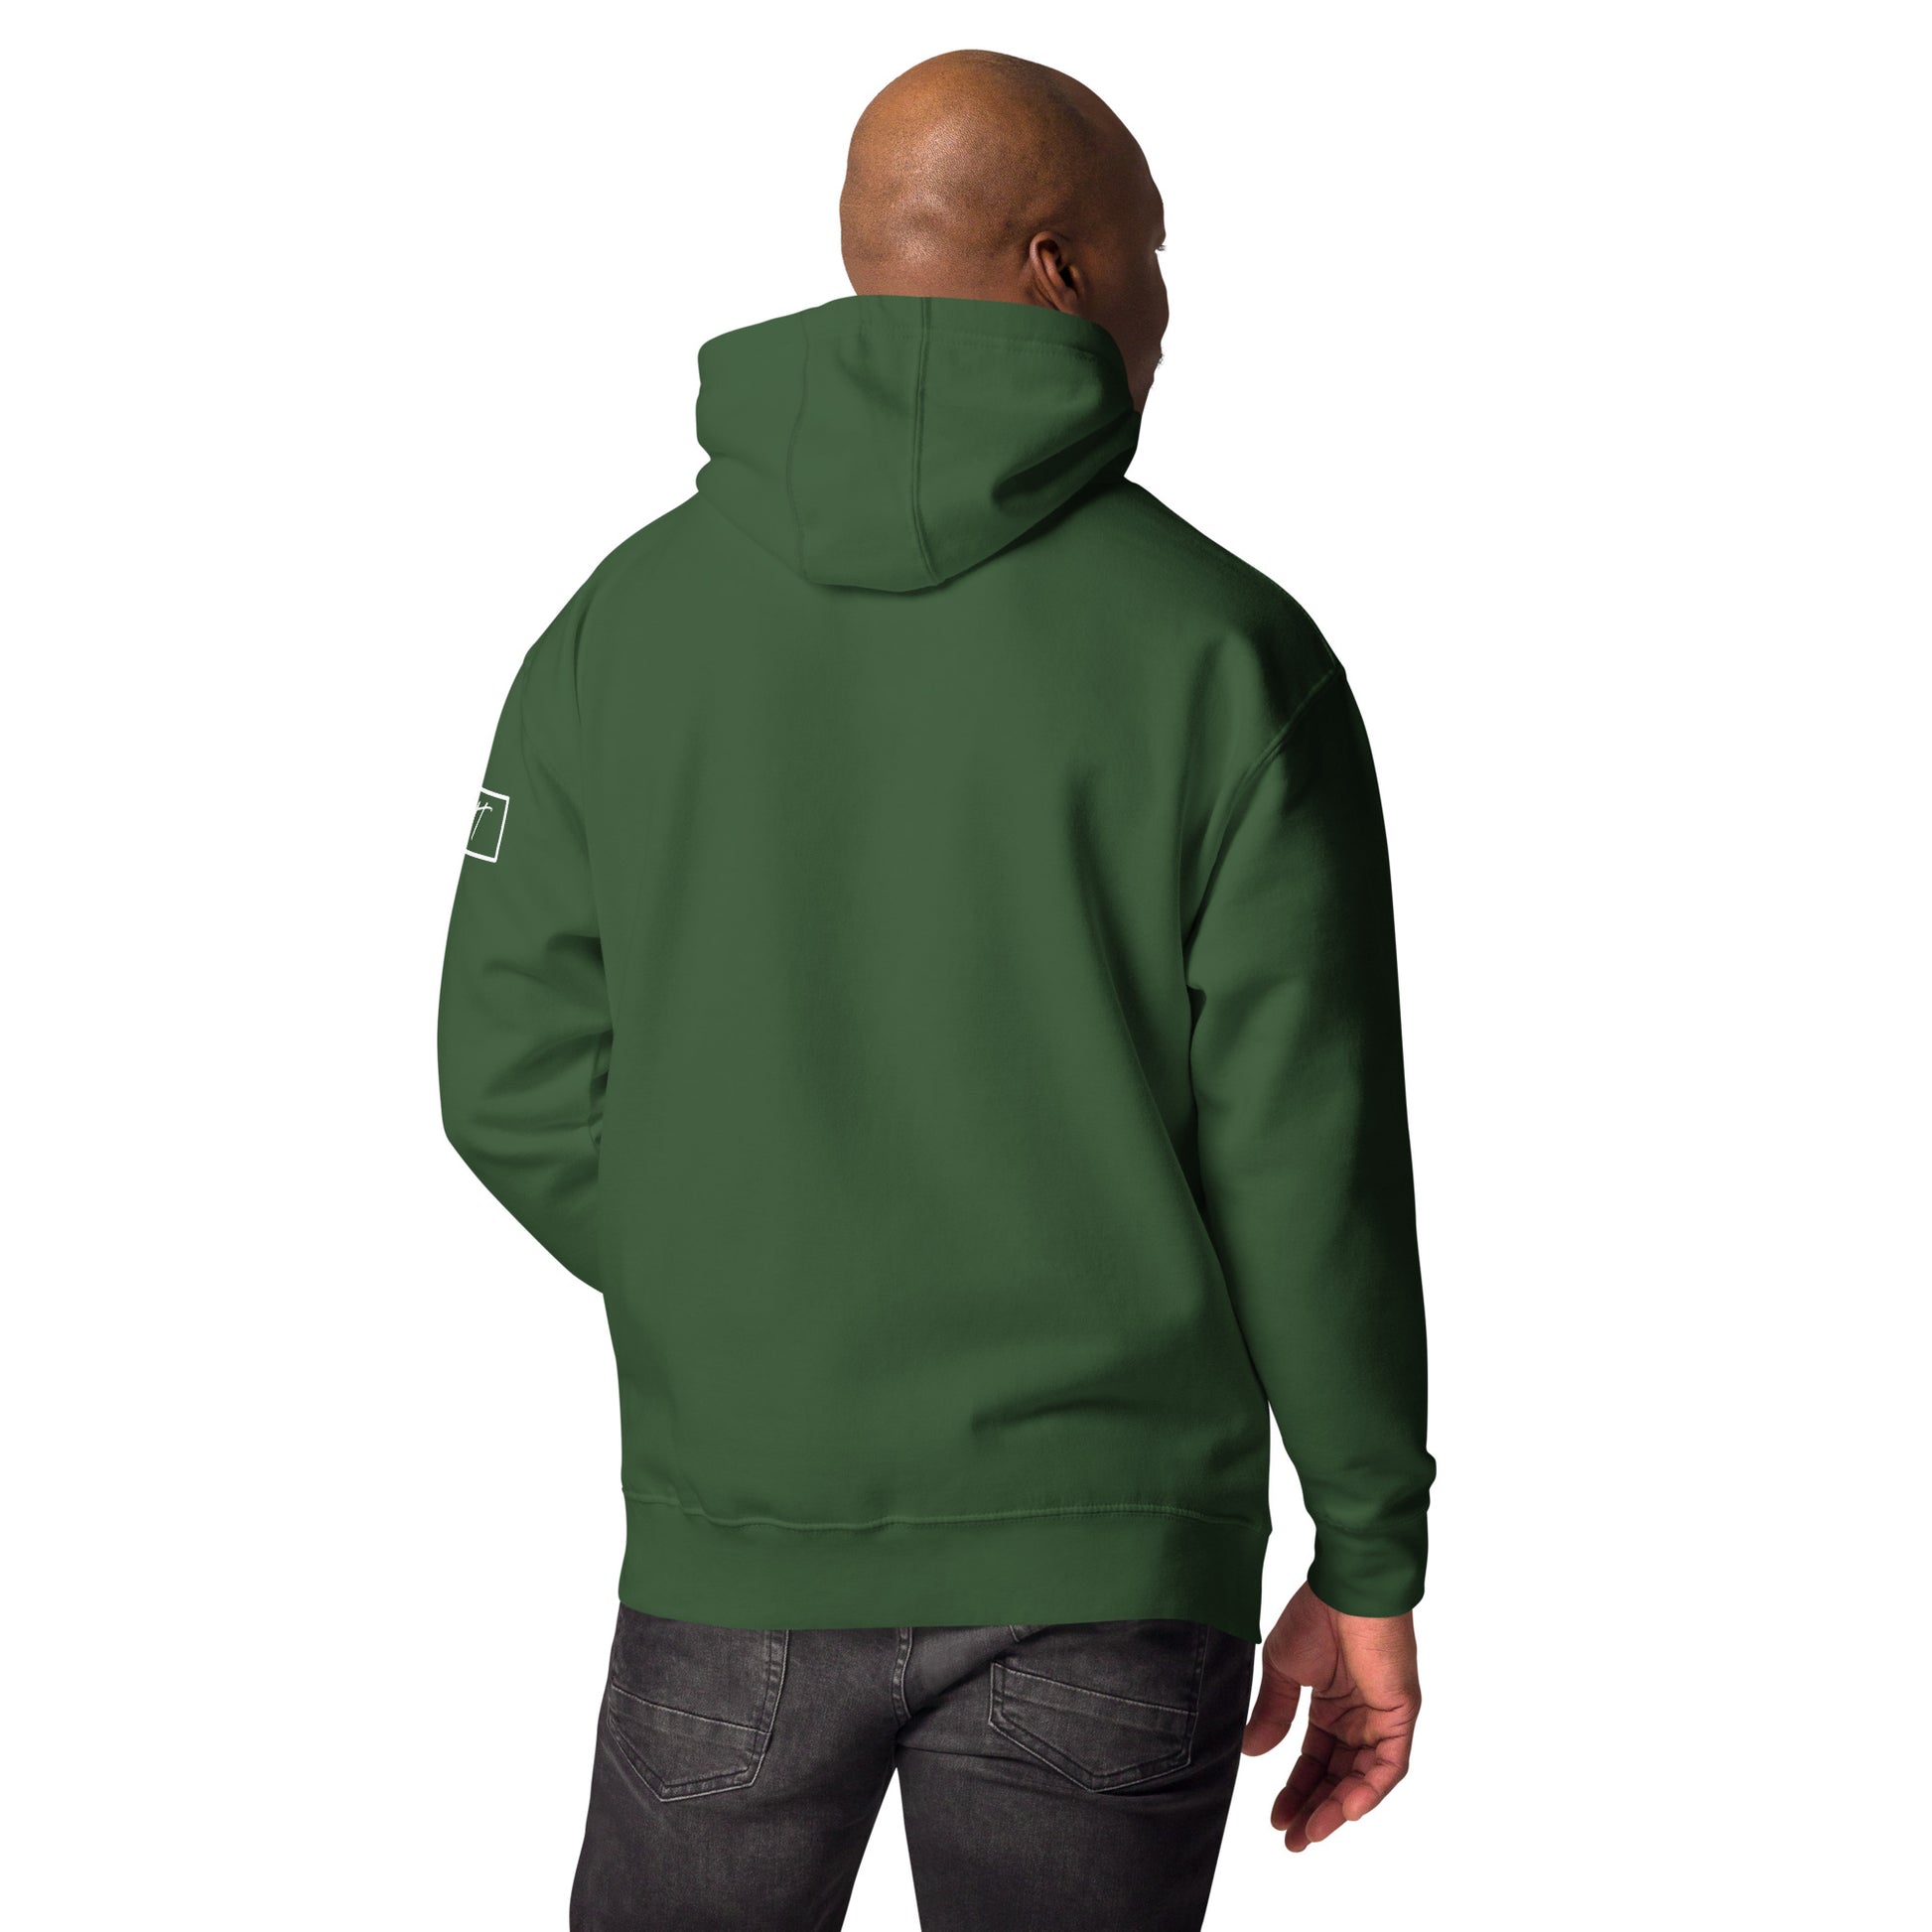 Back-Side view of Storm Castle Peak in Custer Gallatin National Forest Montana Forest Green Hoodies for Men from Park Attire